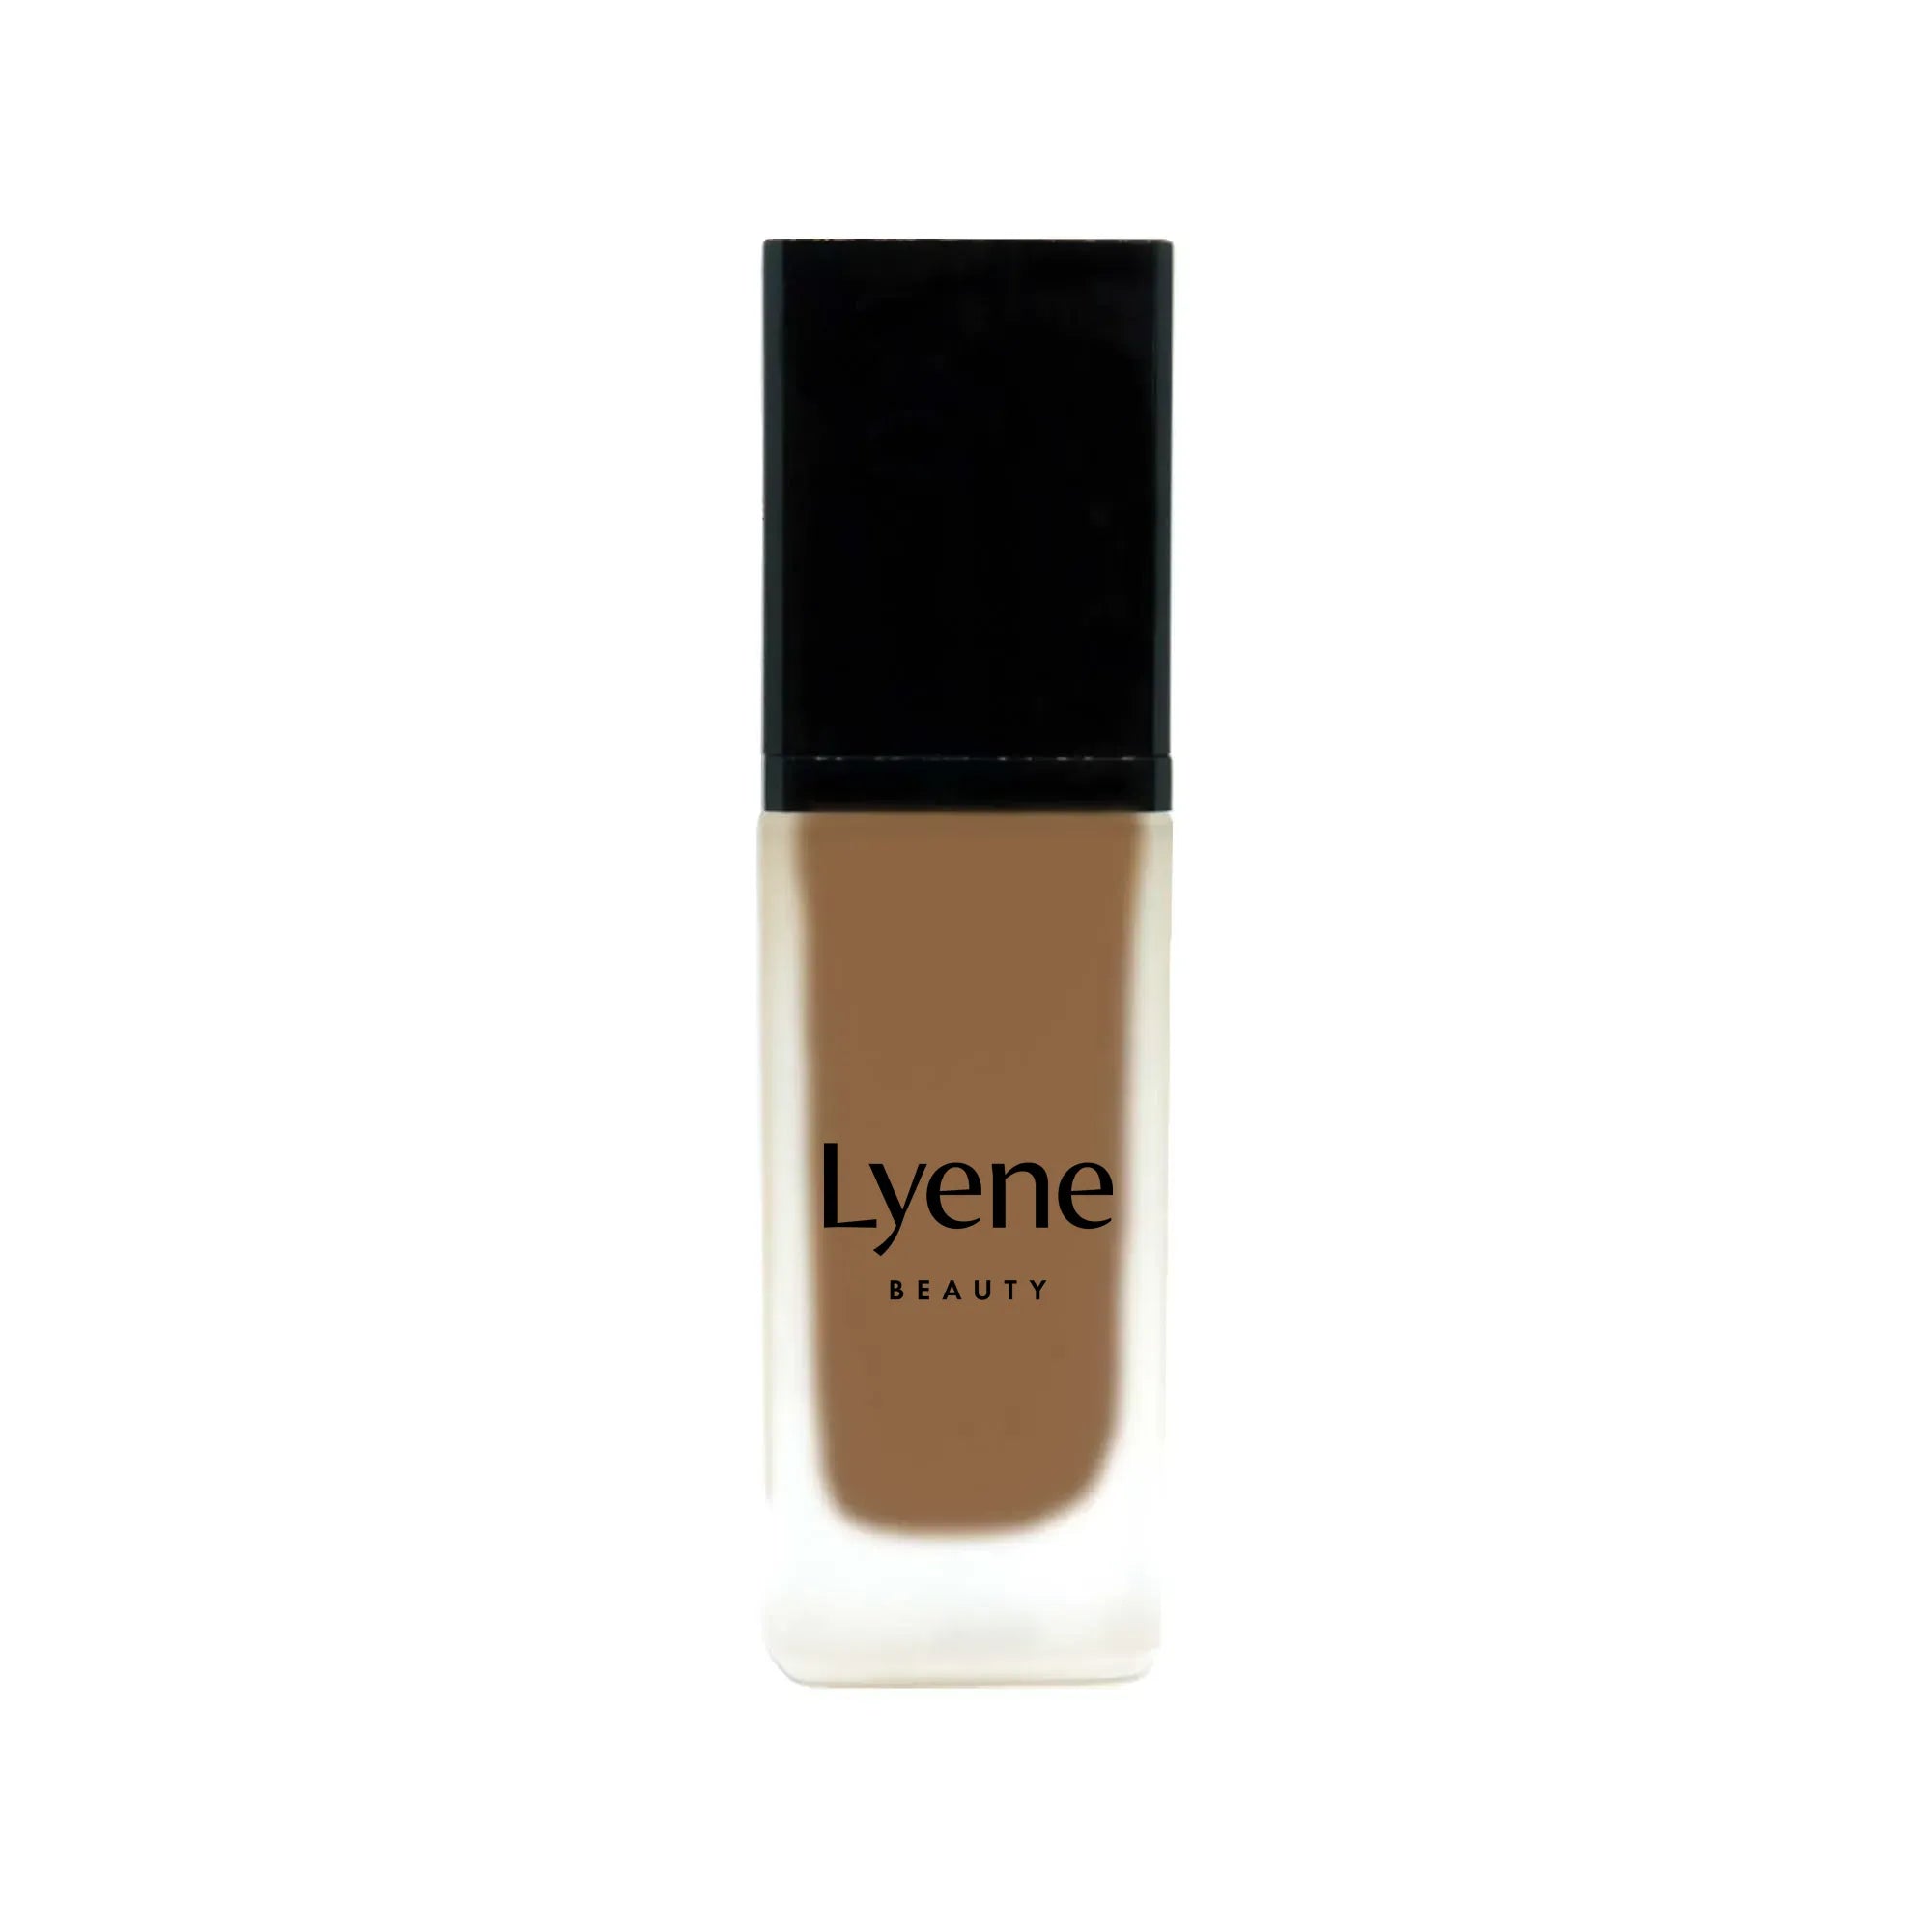 Foundation with SPF - Brunette - Foundation with SPF - Brunette